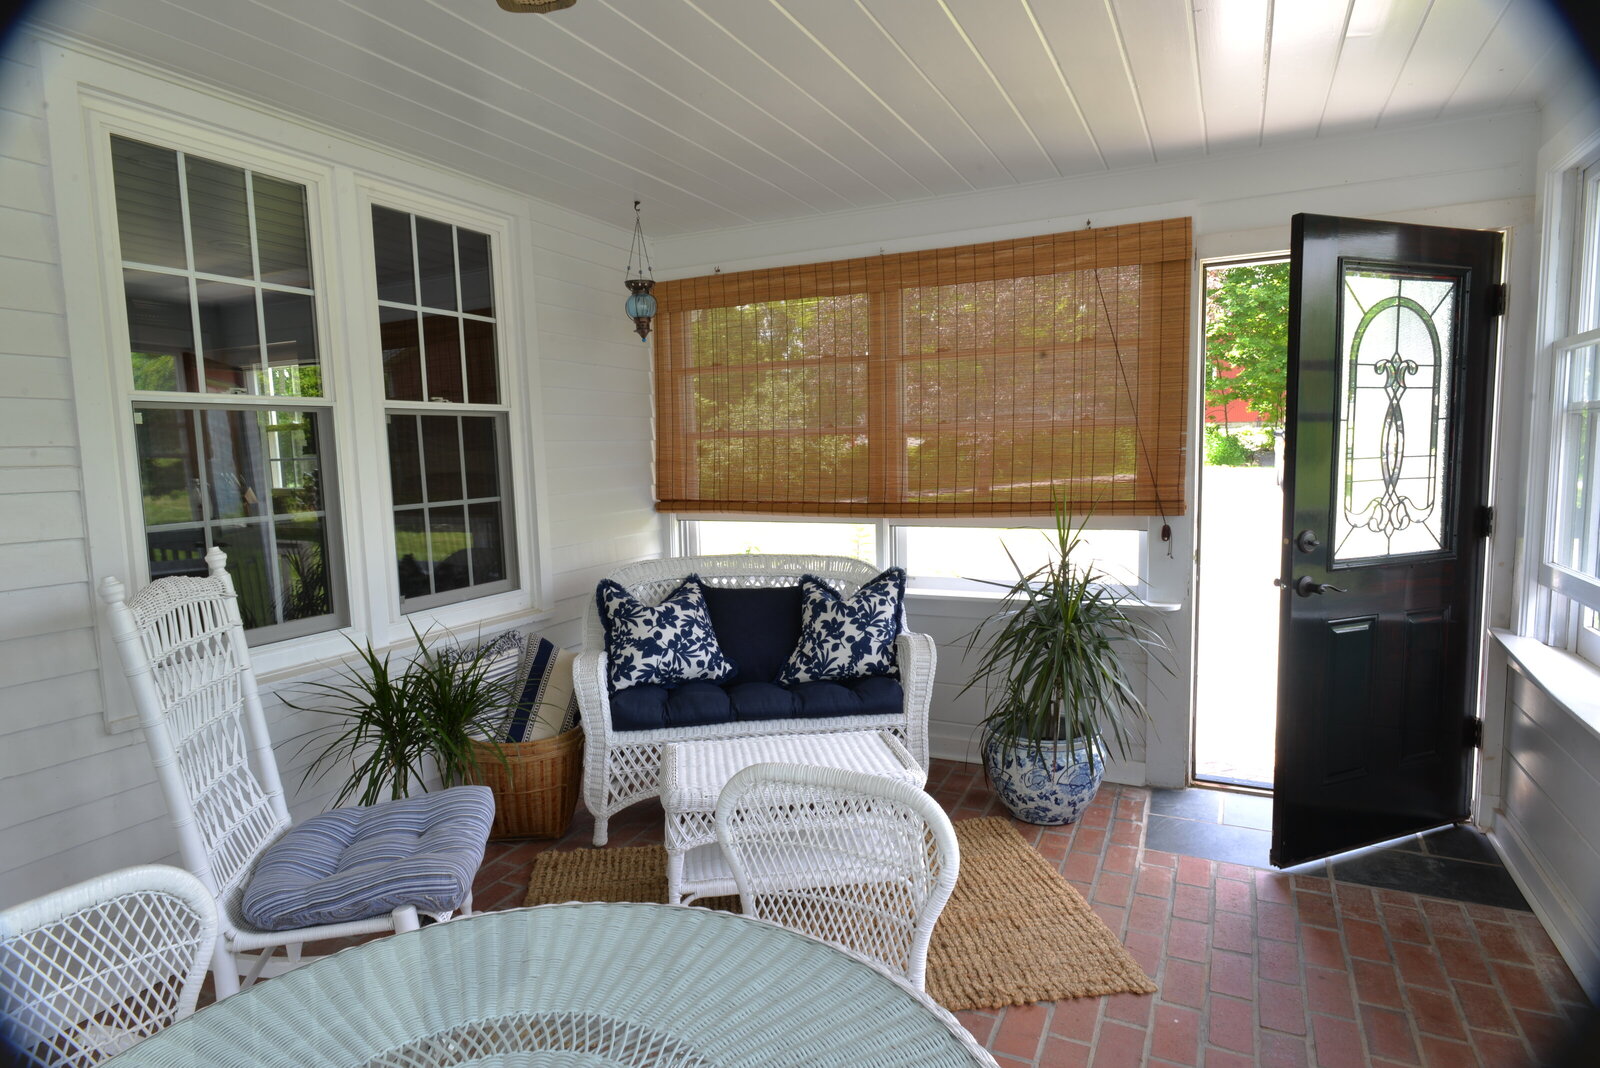 sunroom of farmer cottage with white walls and brick floor and woven roman shades with white wicker seating